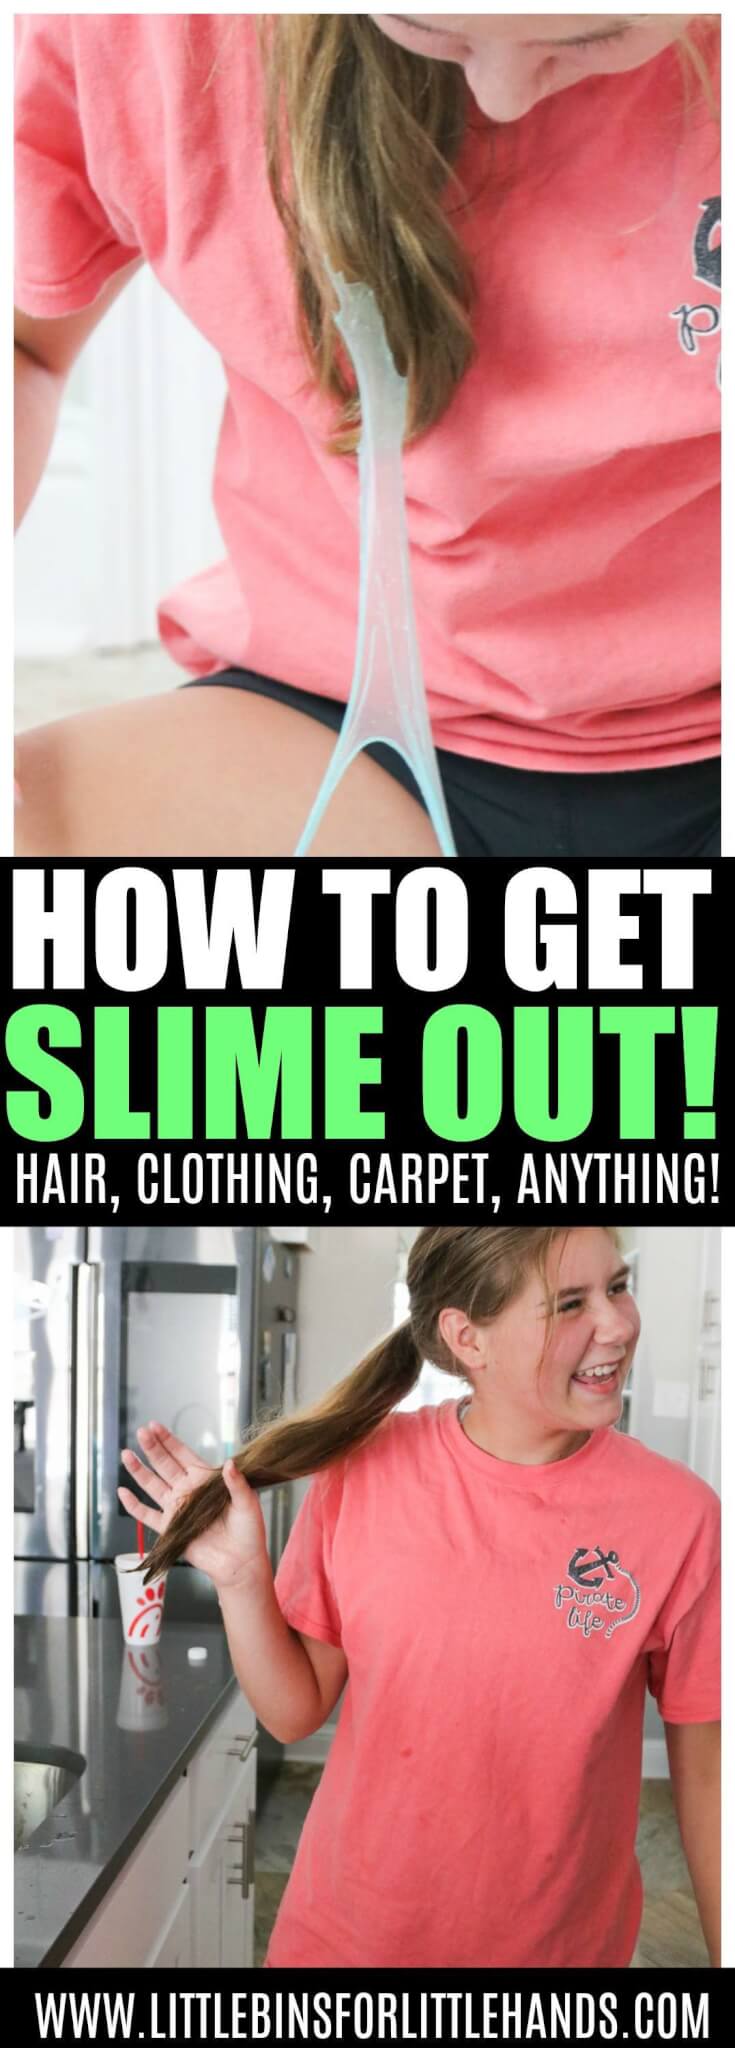 How to Get Slime Out of Clothes (2 Methods to Try!)